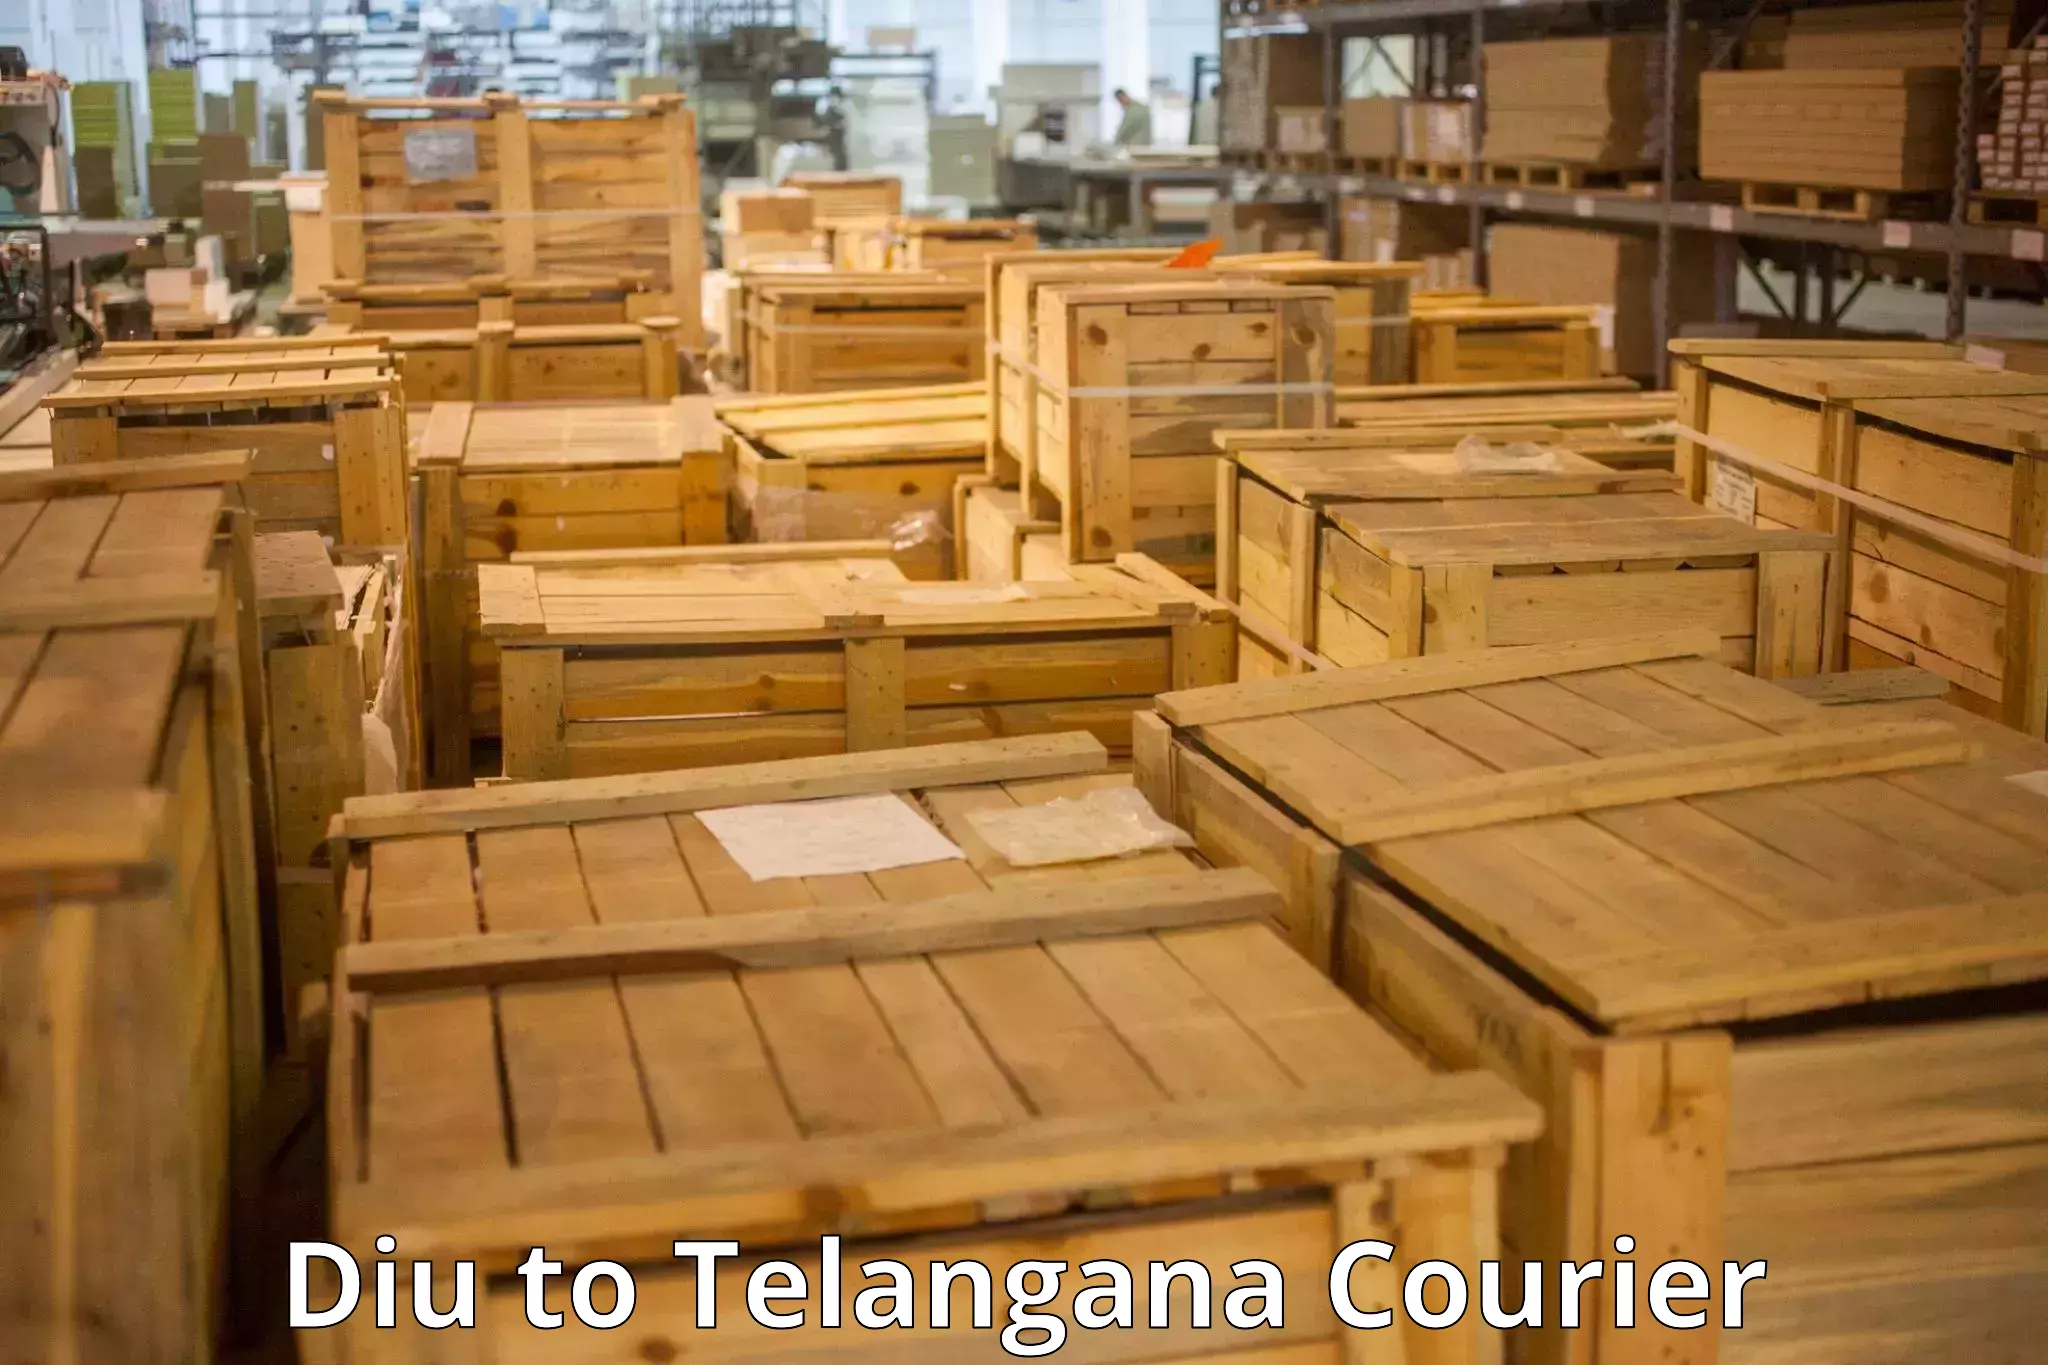 Luggage shipment specialists in Diu to Eligedu